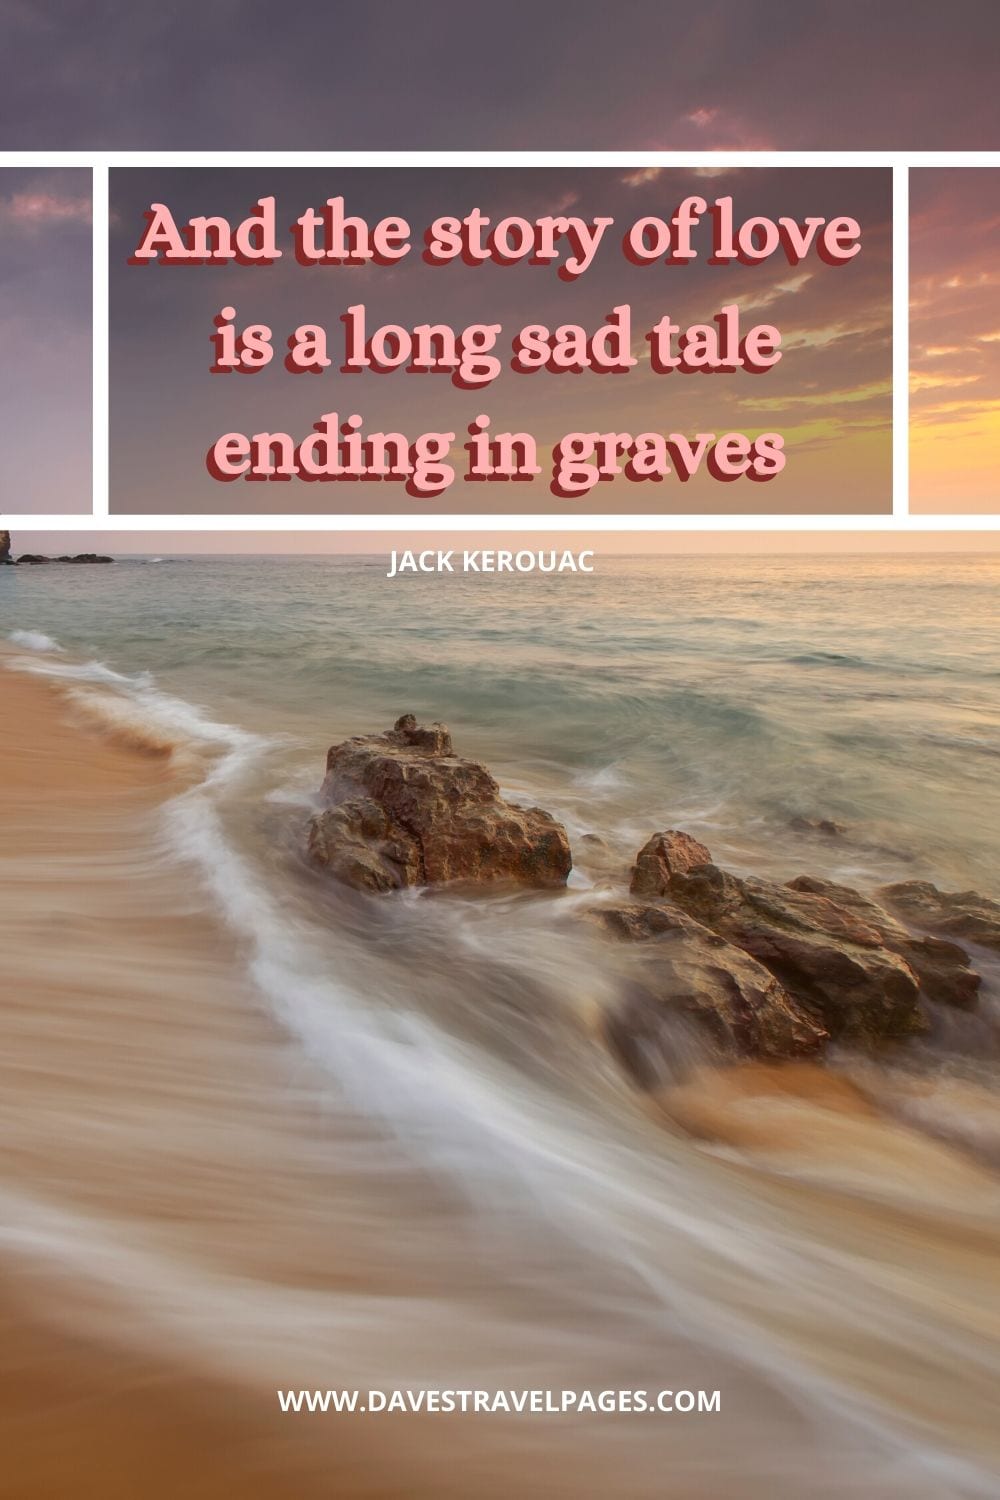 Jack Kerouac Love Quote: “And the story of love is a long sad tale ending in graves.”